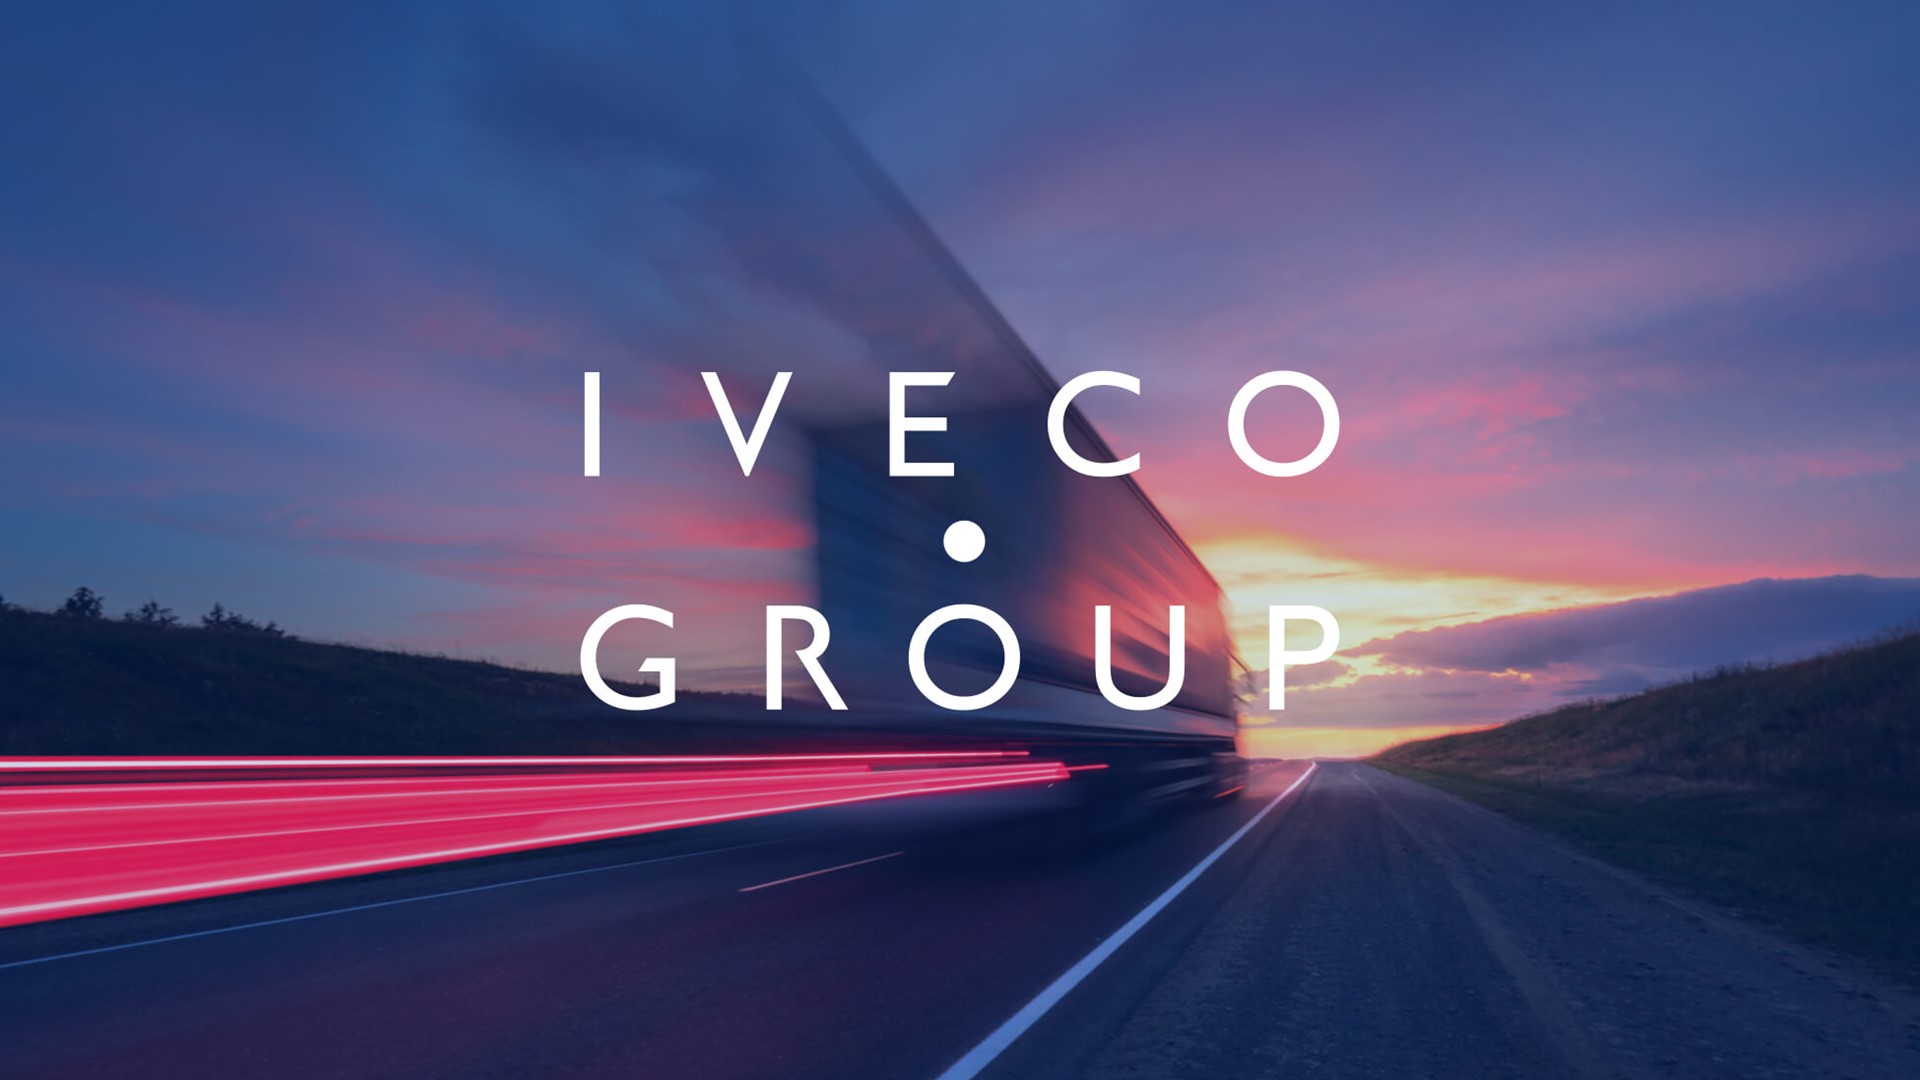 Iveco Group - background 16